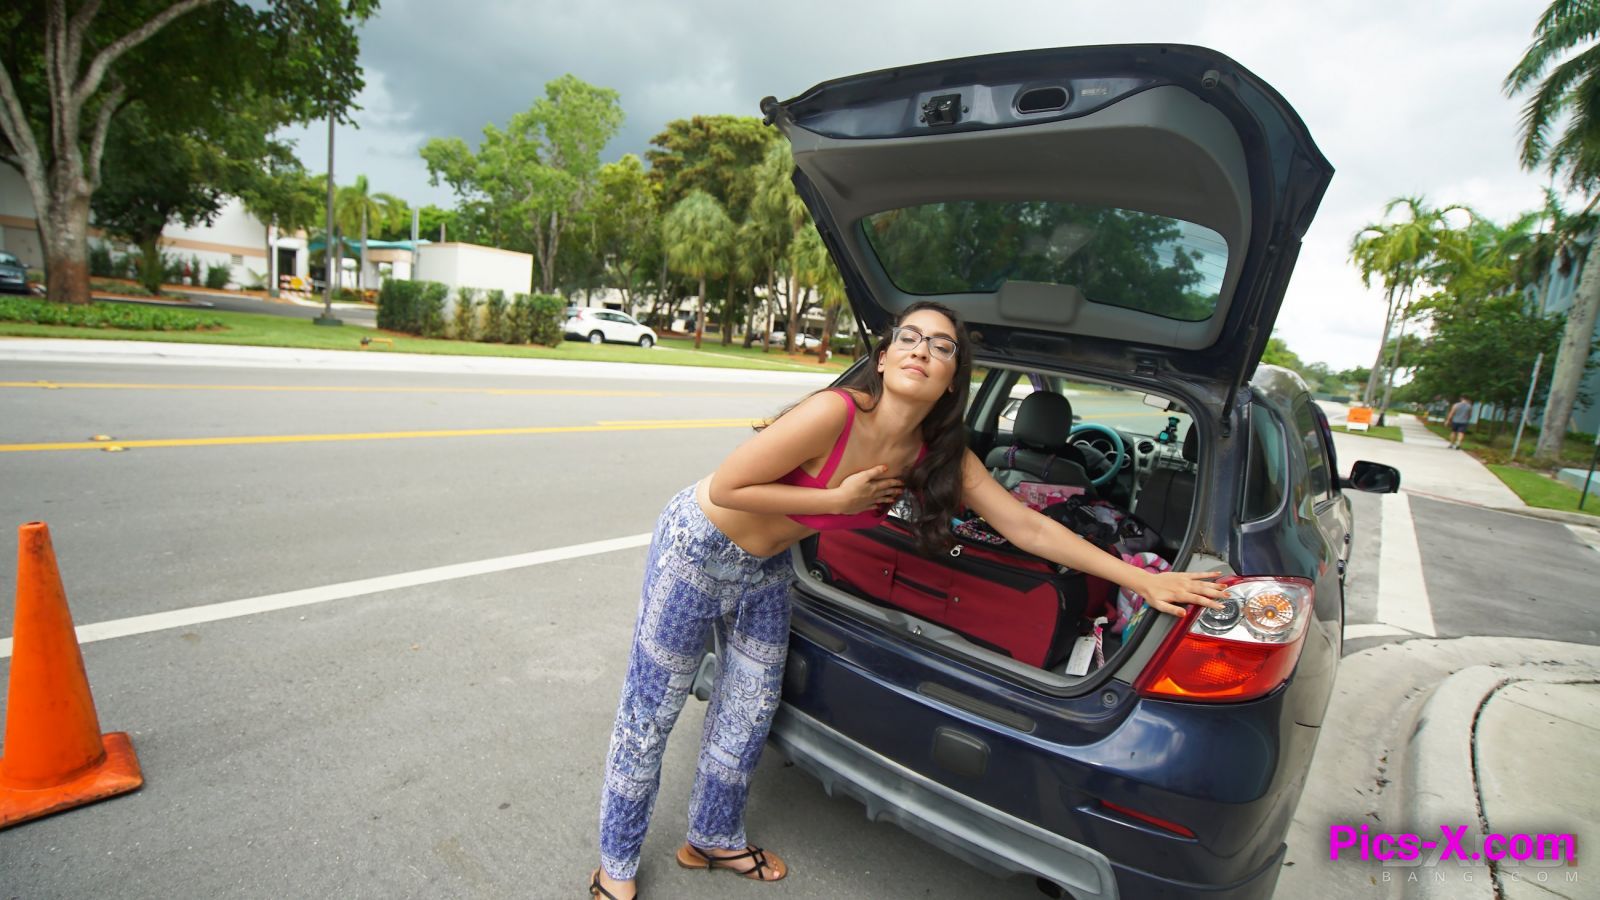 Xaya Lovelle is a hippie chick that will fuck to get her car fixed - Image 17